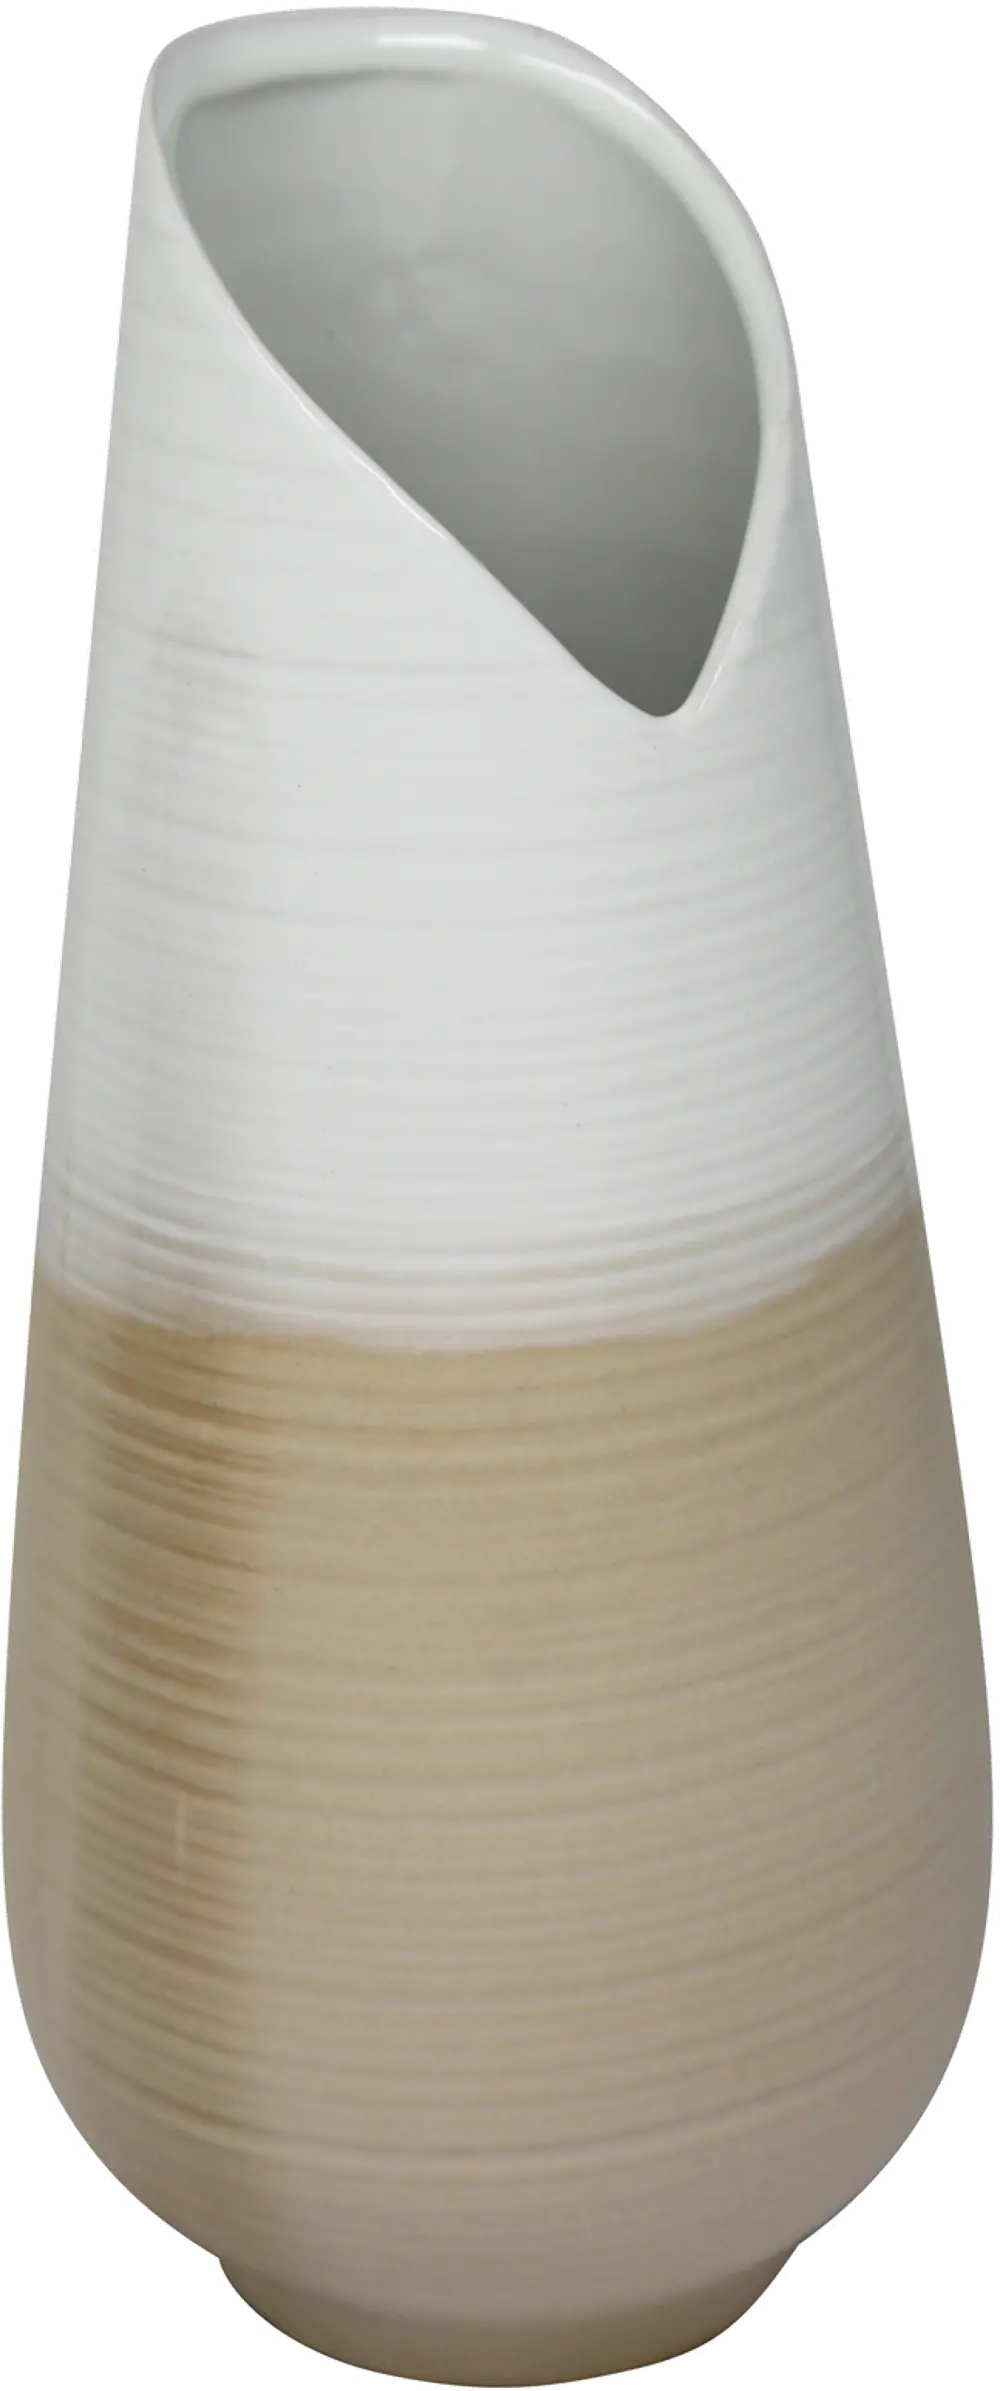 14 Inch White and Beige Two Tone Ceramic Vase-1